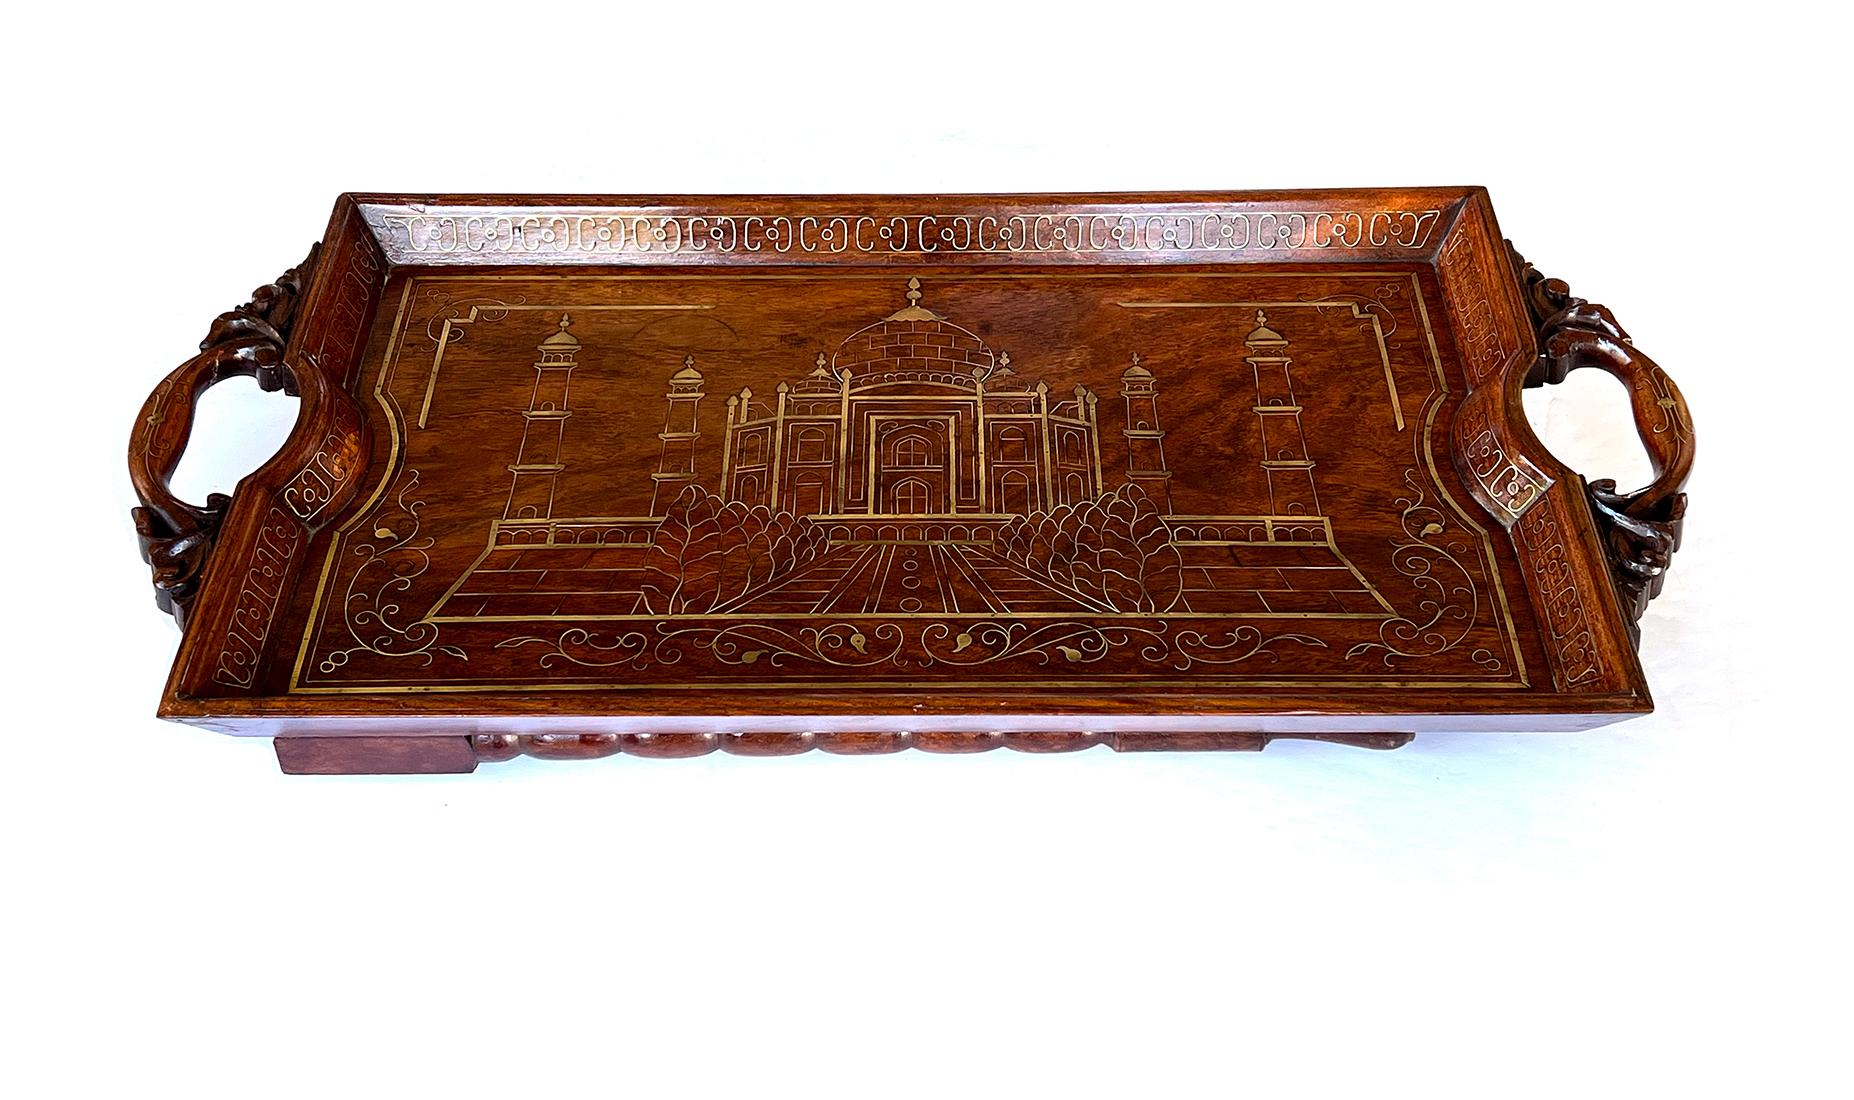 Inlay Anglo Indian Butlers-Style Inlaid Wooden Traveling Table Depicting Taj Mahal